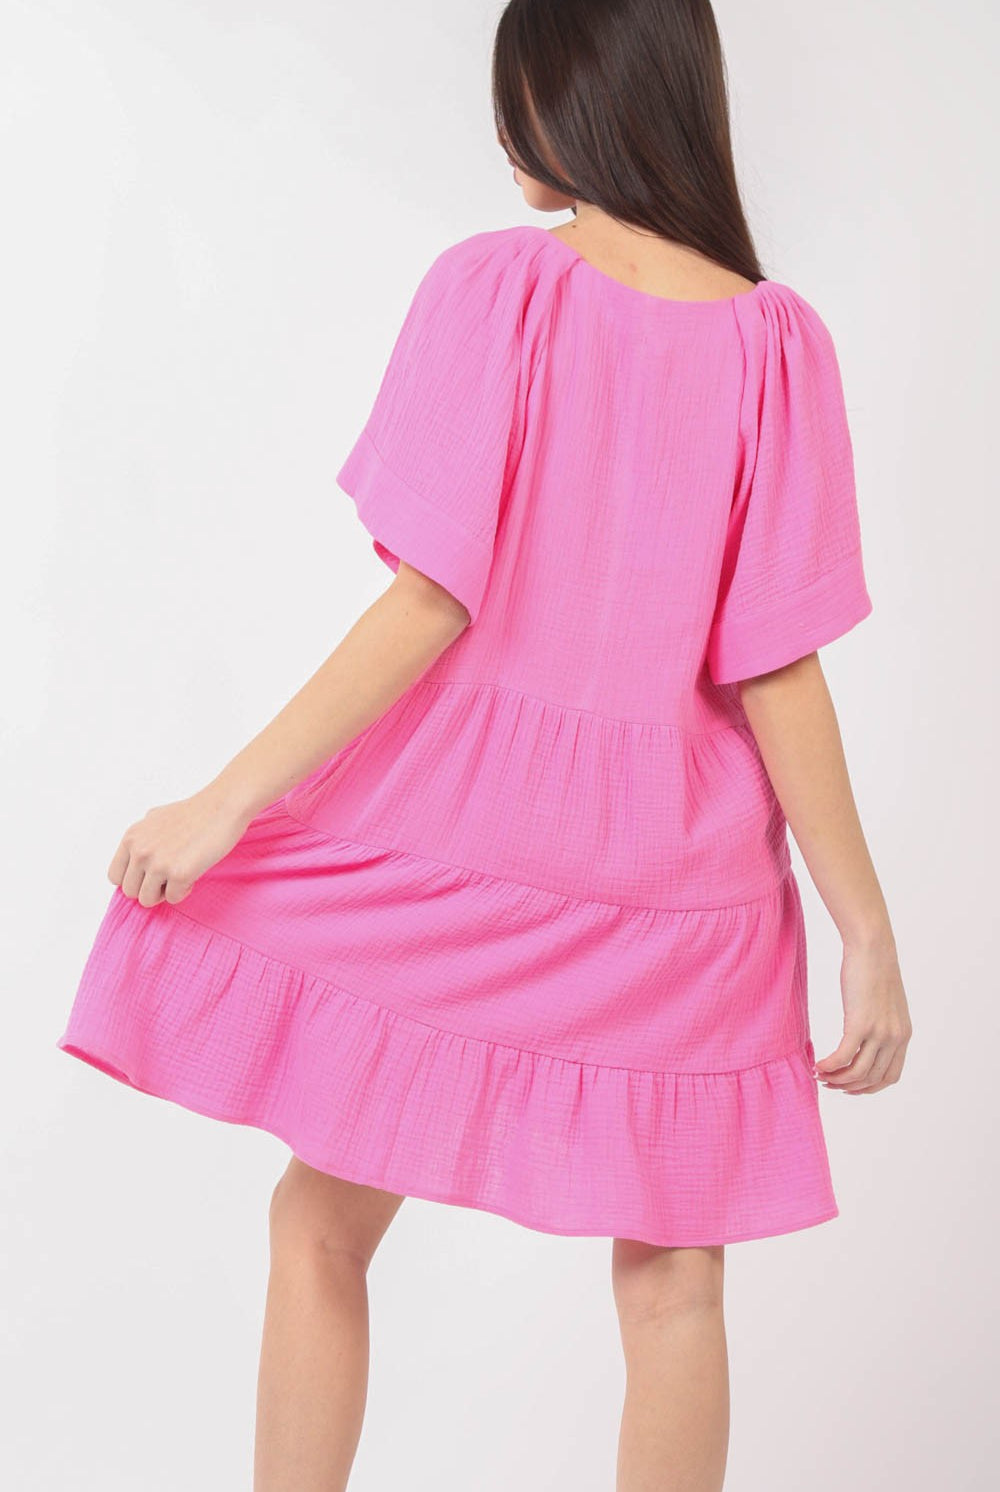 A model wears a vibrant pink, ruffled tiered short dress with a V-neckline, flutter sleeves, and a flounce hem, paired with white sandals with ruffle details.